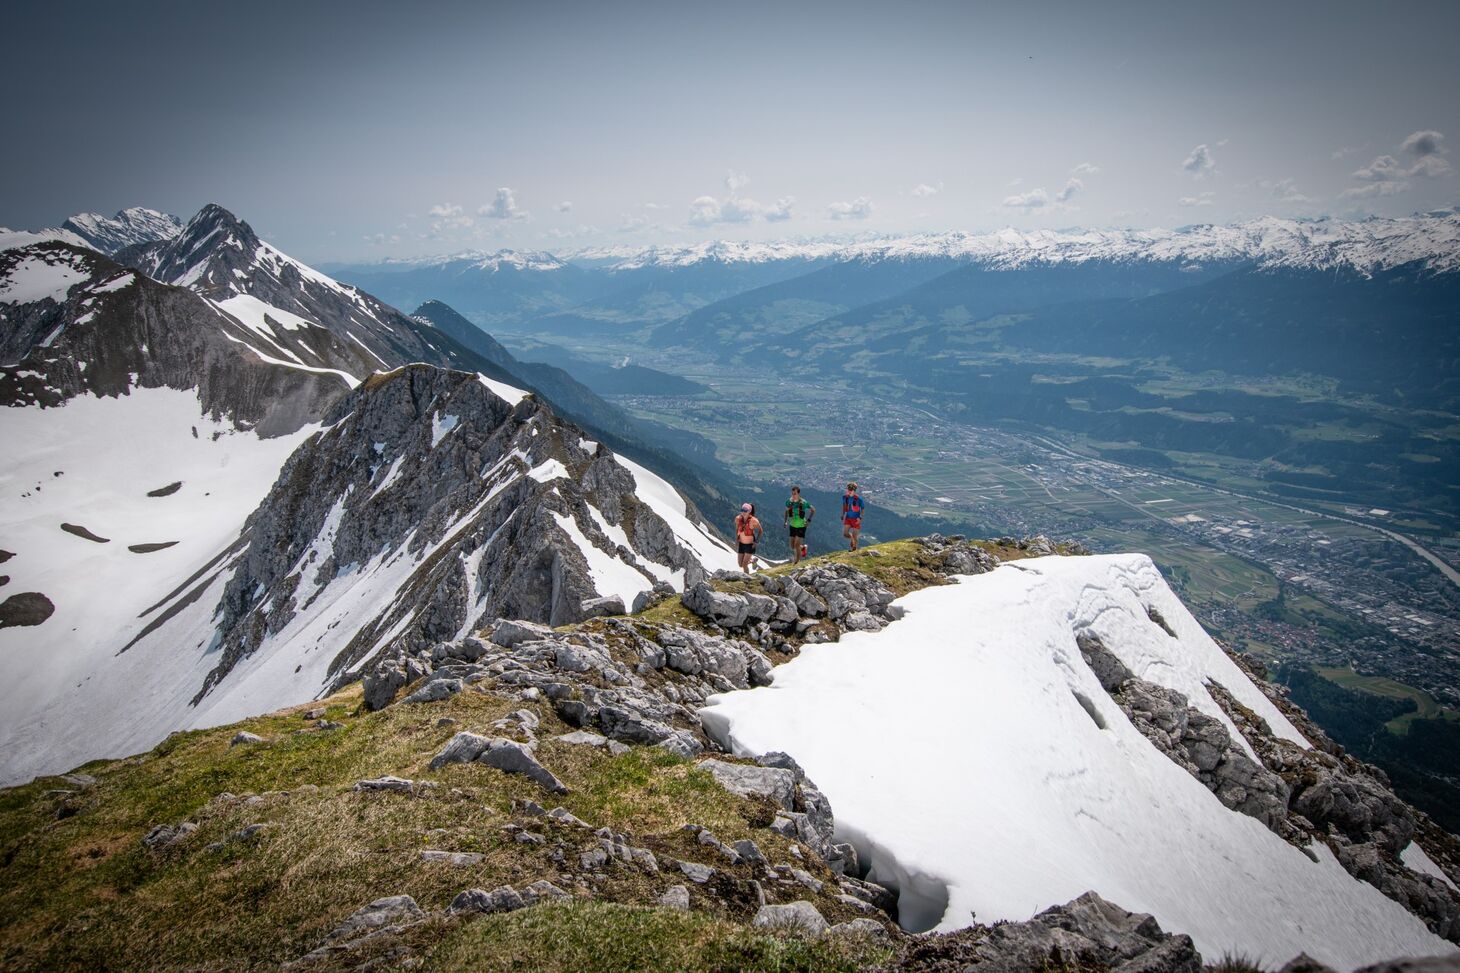 Trail runners on a ridge overlooking a valley